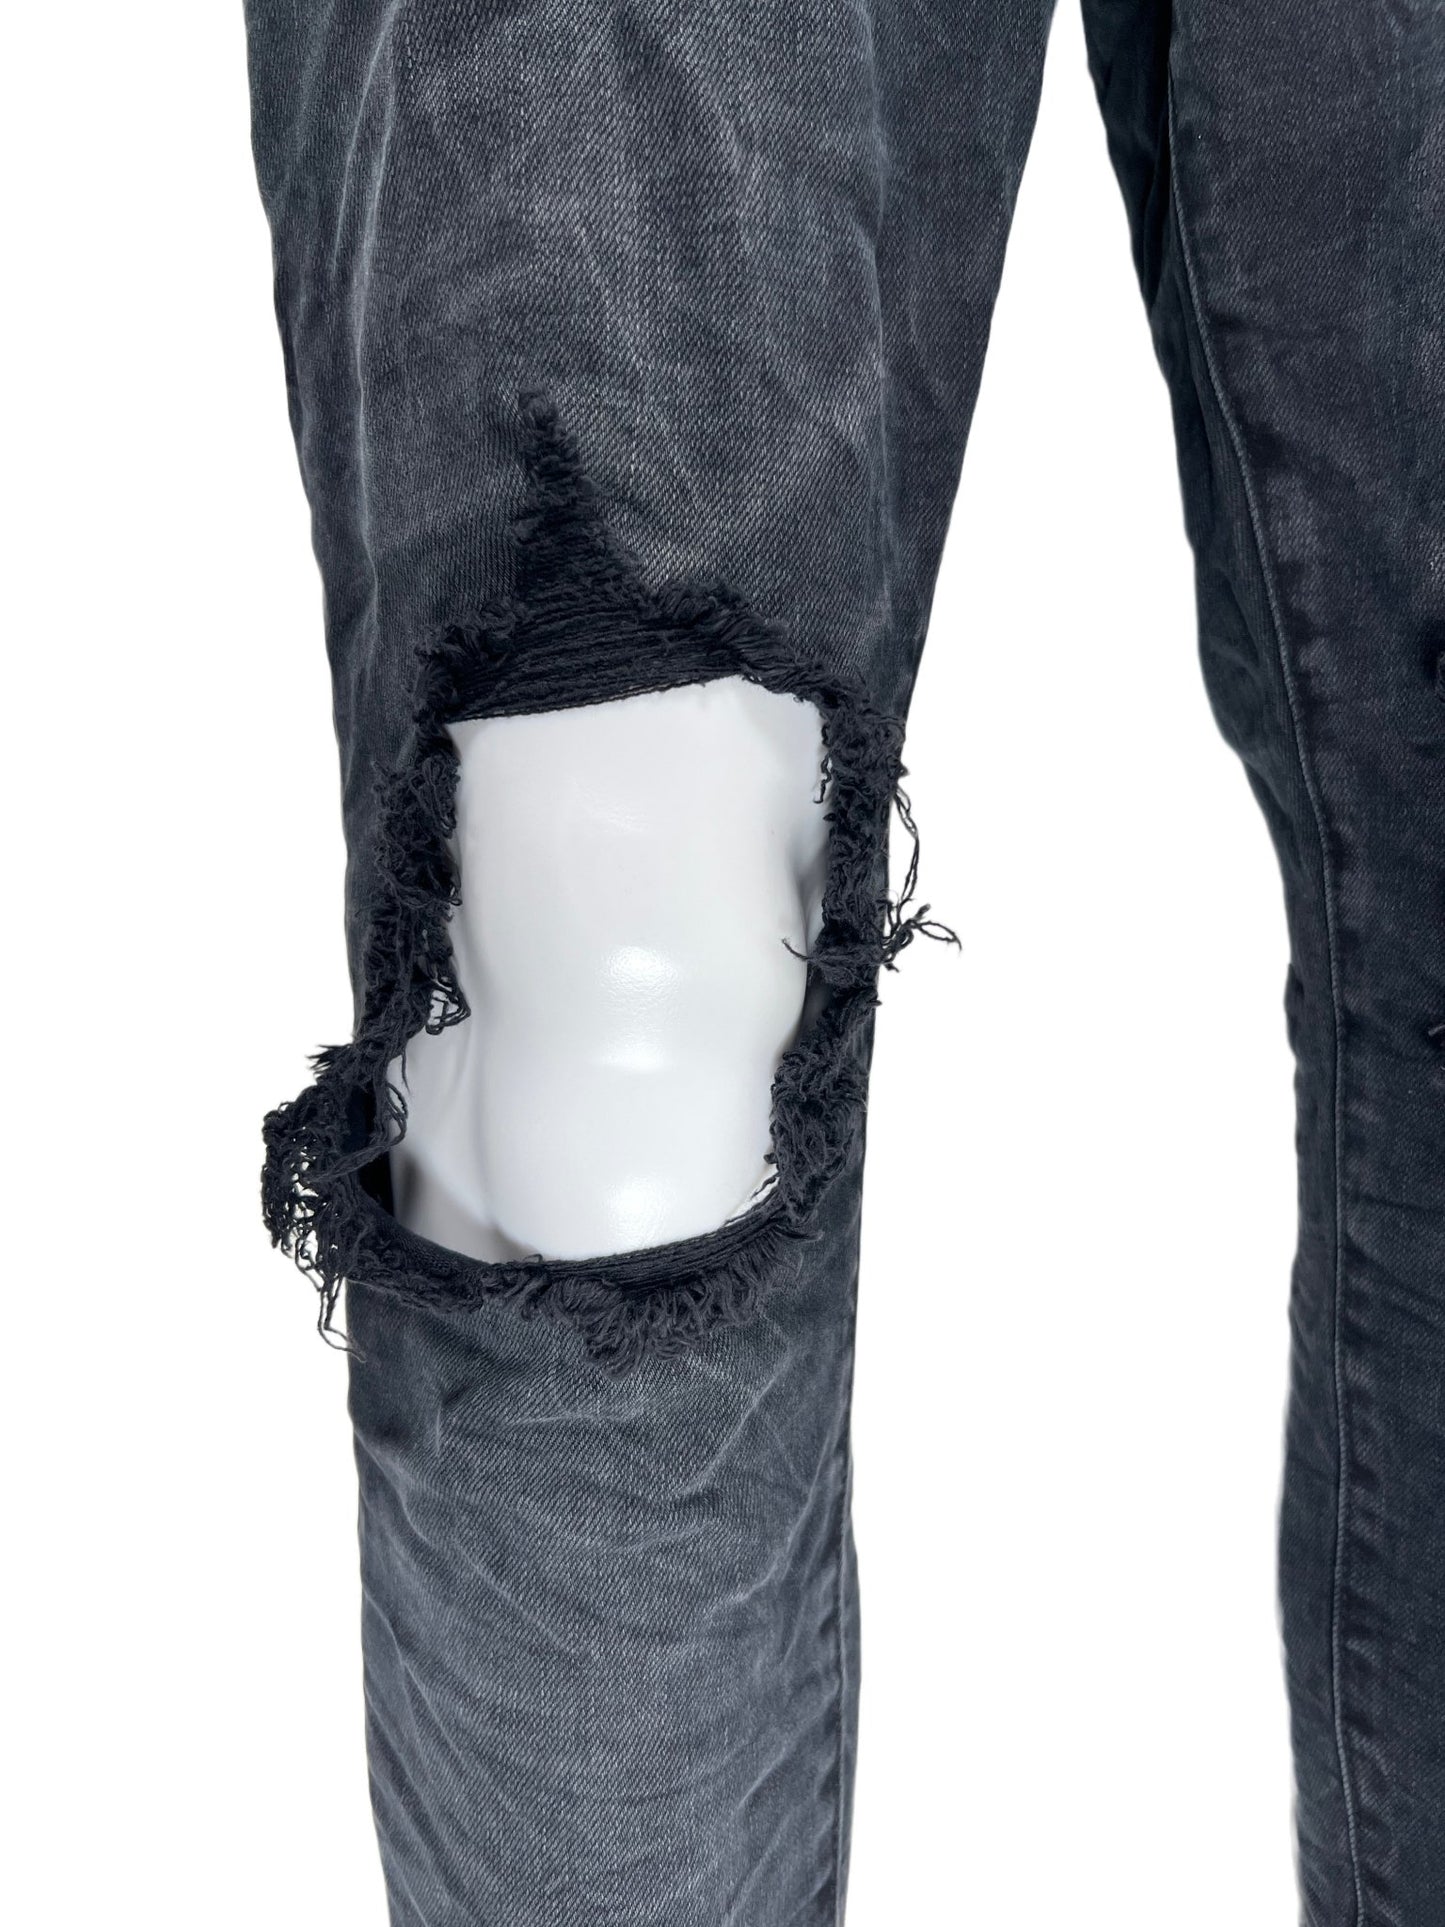 A pair of PURPLE BRAND jeans with ripped knees.